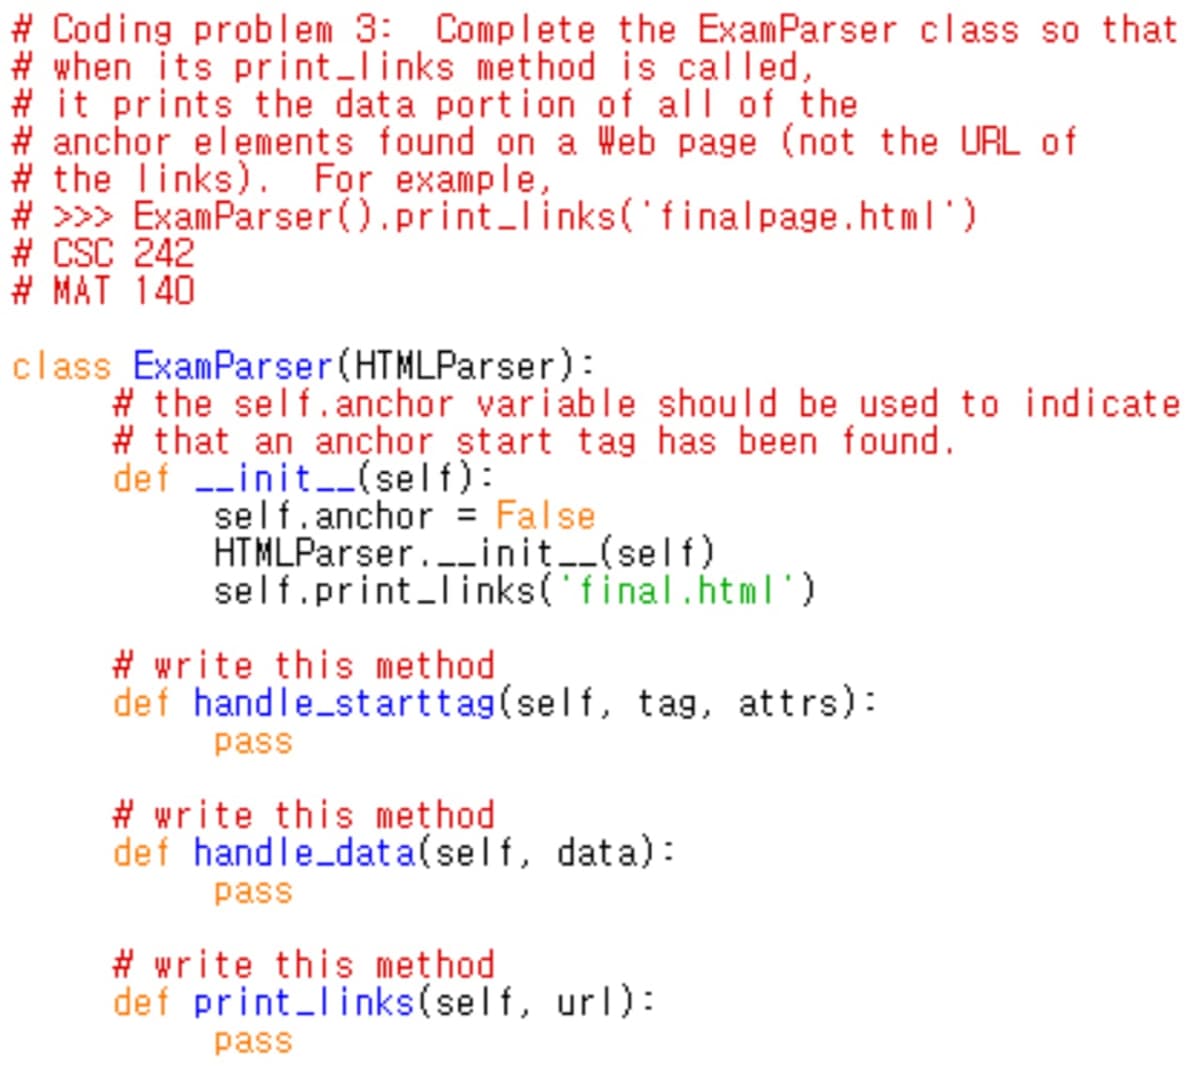 # Coding problem 3: Complete the ExamParser class so that
# when its print_links method is called,
# it prints the data portion of all of the
# anchor elements found on a Web page (not the URL of
# the links). For example,
# >>> ExamParser().print_I inks('finalpage.html')
# CSC 242
# MAT 140
class ExamParser(HTMLParser):
# the self.anchor variable should be used to indicate
# that an ançhor start tag has been found.
def --init-_(self):
self.anchor = False
HTMLParser.._init__(self)
self.print_Iinks('final.html')
# write this method
def handle_starttag(self, tag, attrs):
pass
# write this method
def handle_data(self, data):
pass
# write this method
def print_links(self, url):
pass
